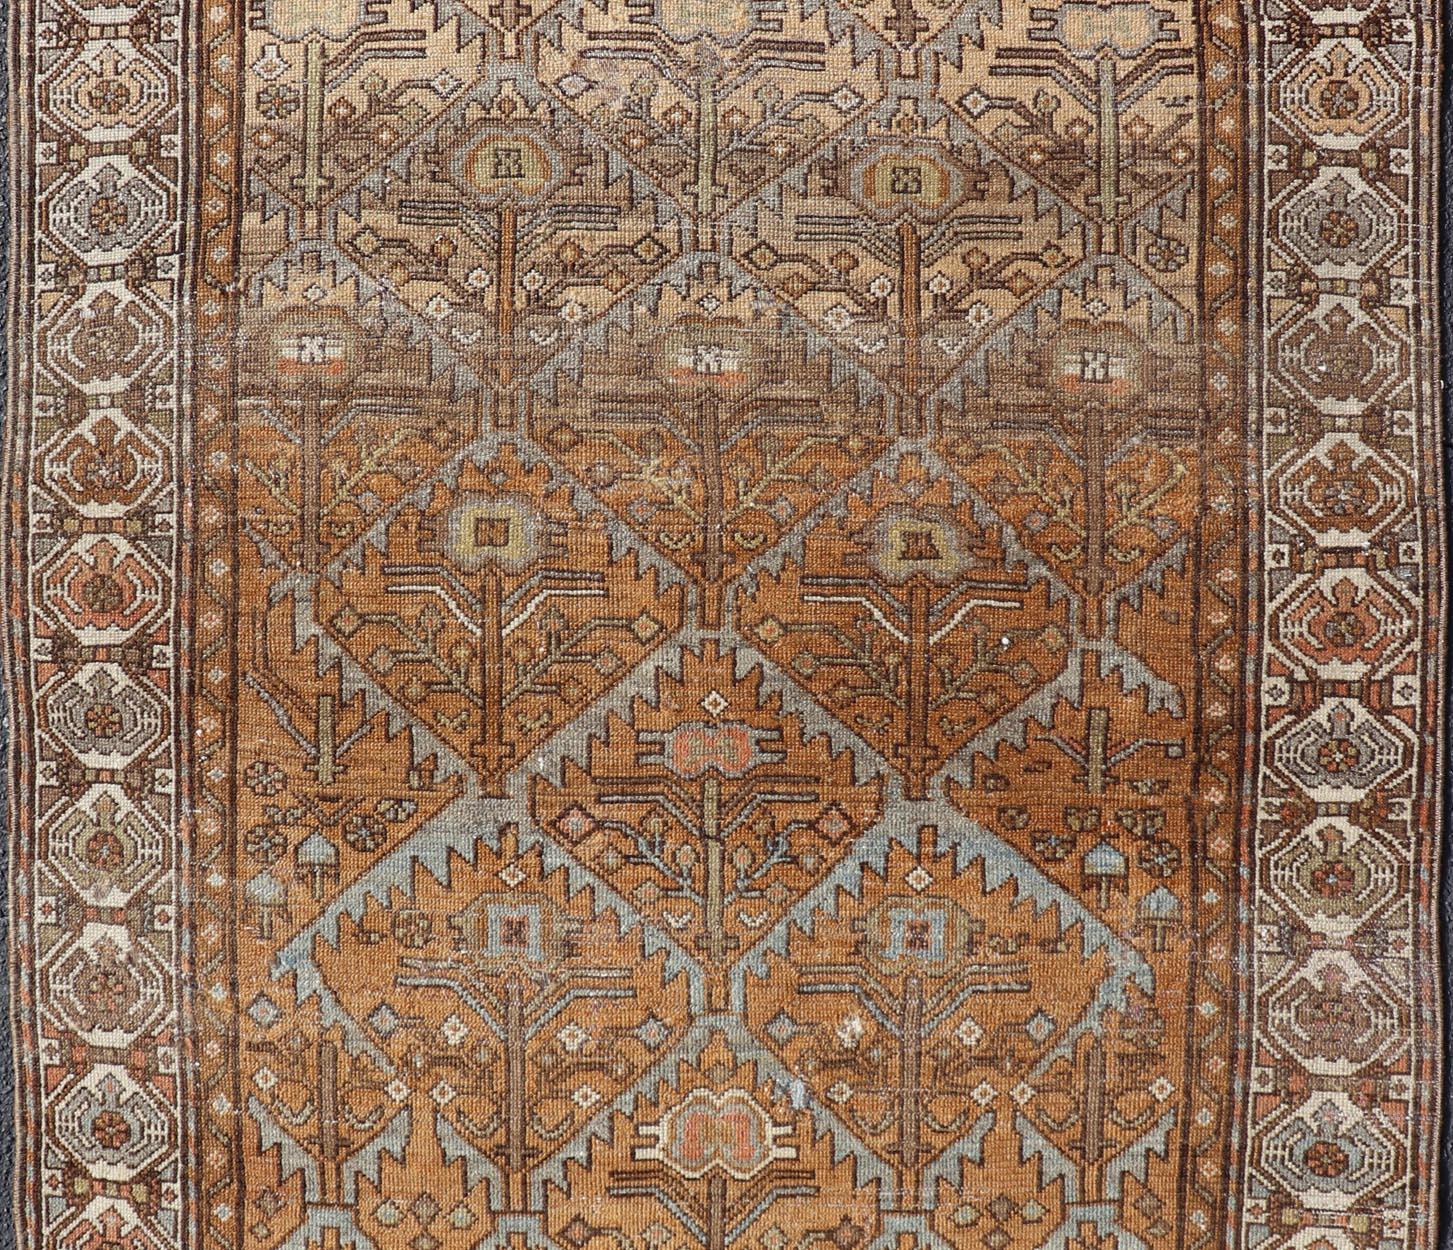 Antique Persian Malayer in Rustic Earthy Tones With All-Over Tribal Medallions. Country of Origin: Iran Type: Malayer.  All-Over, Medallion, Keivan Woven Arts; rug V21-1203 : Persian Rug, early 20th Century
Measures: 4'0 x 5'4 
This antique Persian